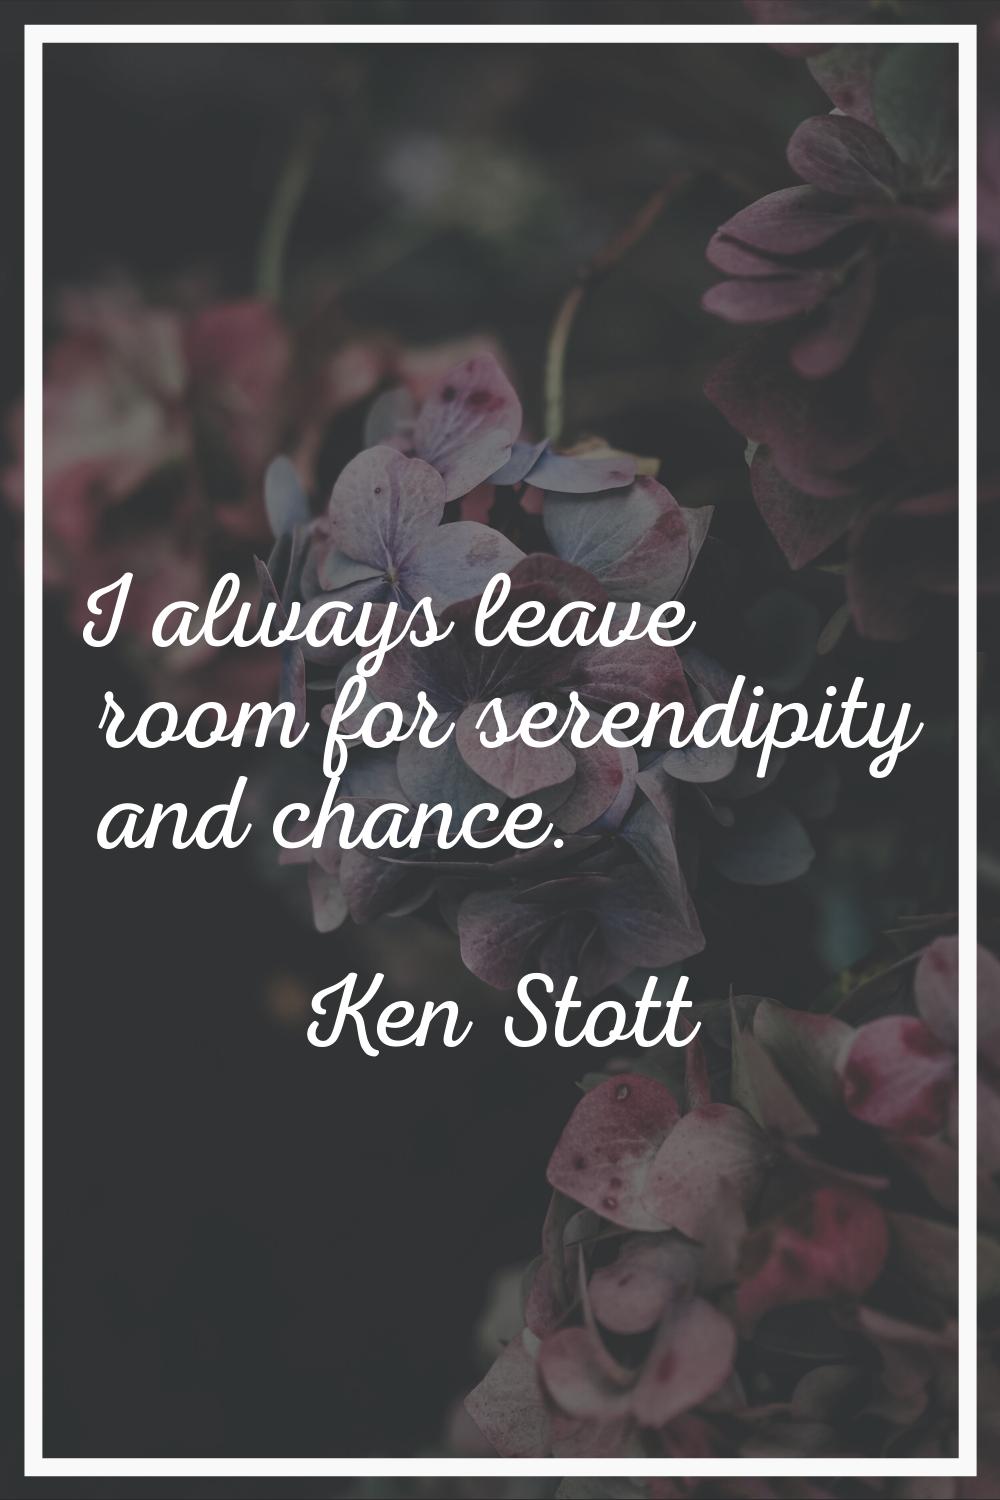 I always leave room for serendipity and chance.